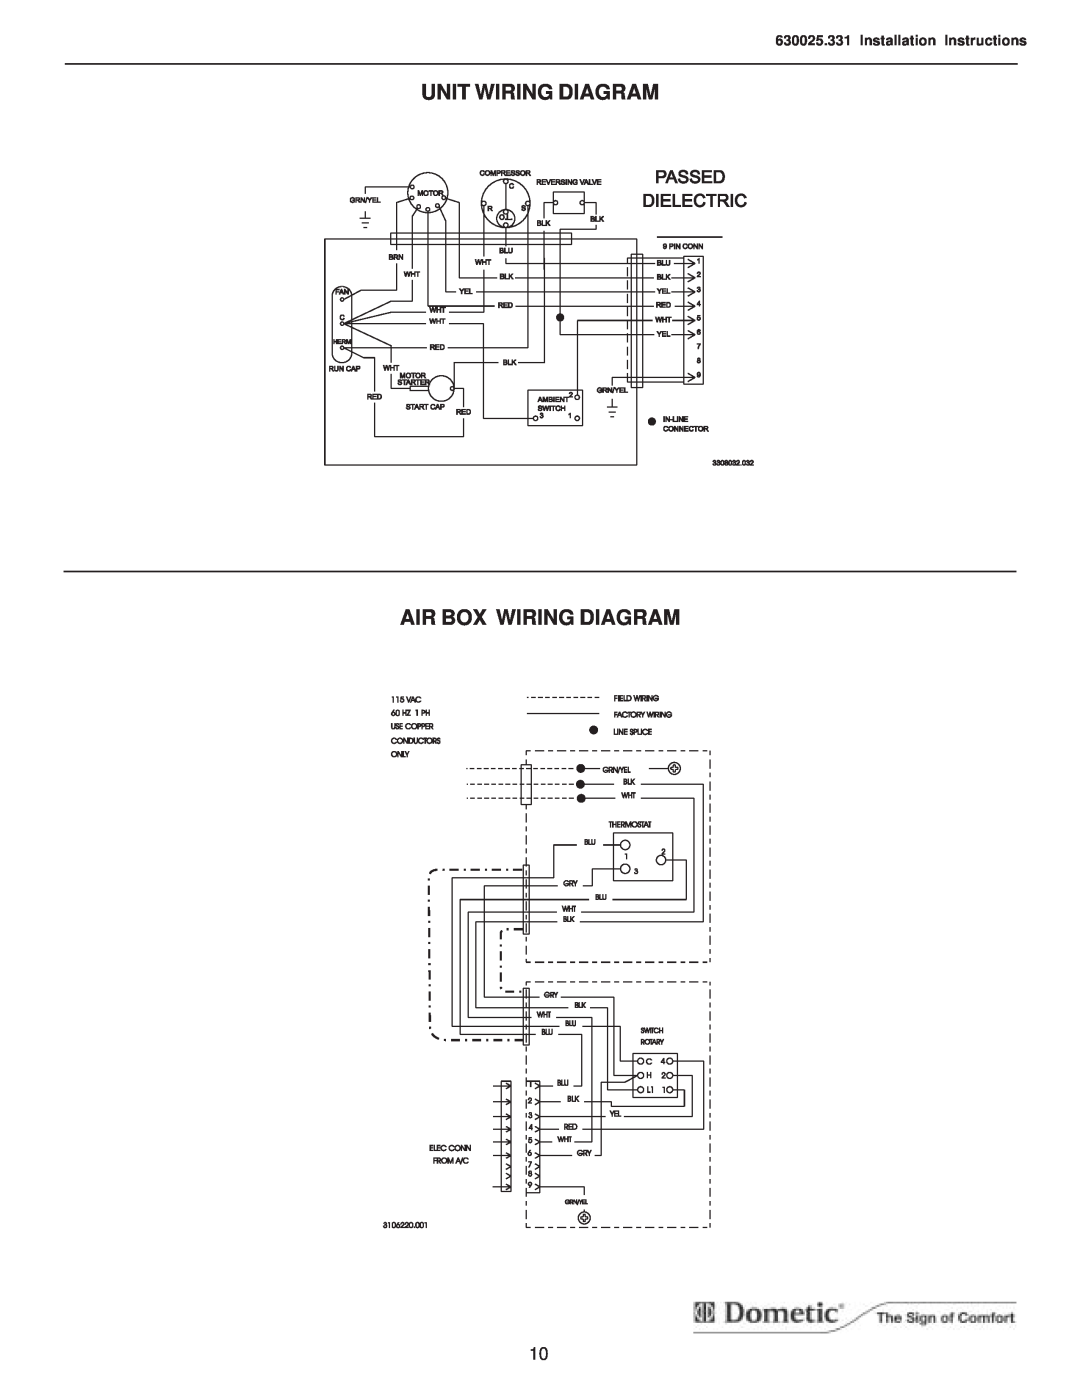 Dometic 630025.331 Unit Wiring Diagram, Air Box Wiring Diagram, Passed, Dielectric, Installation Instructions 